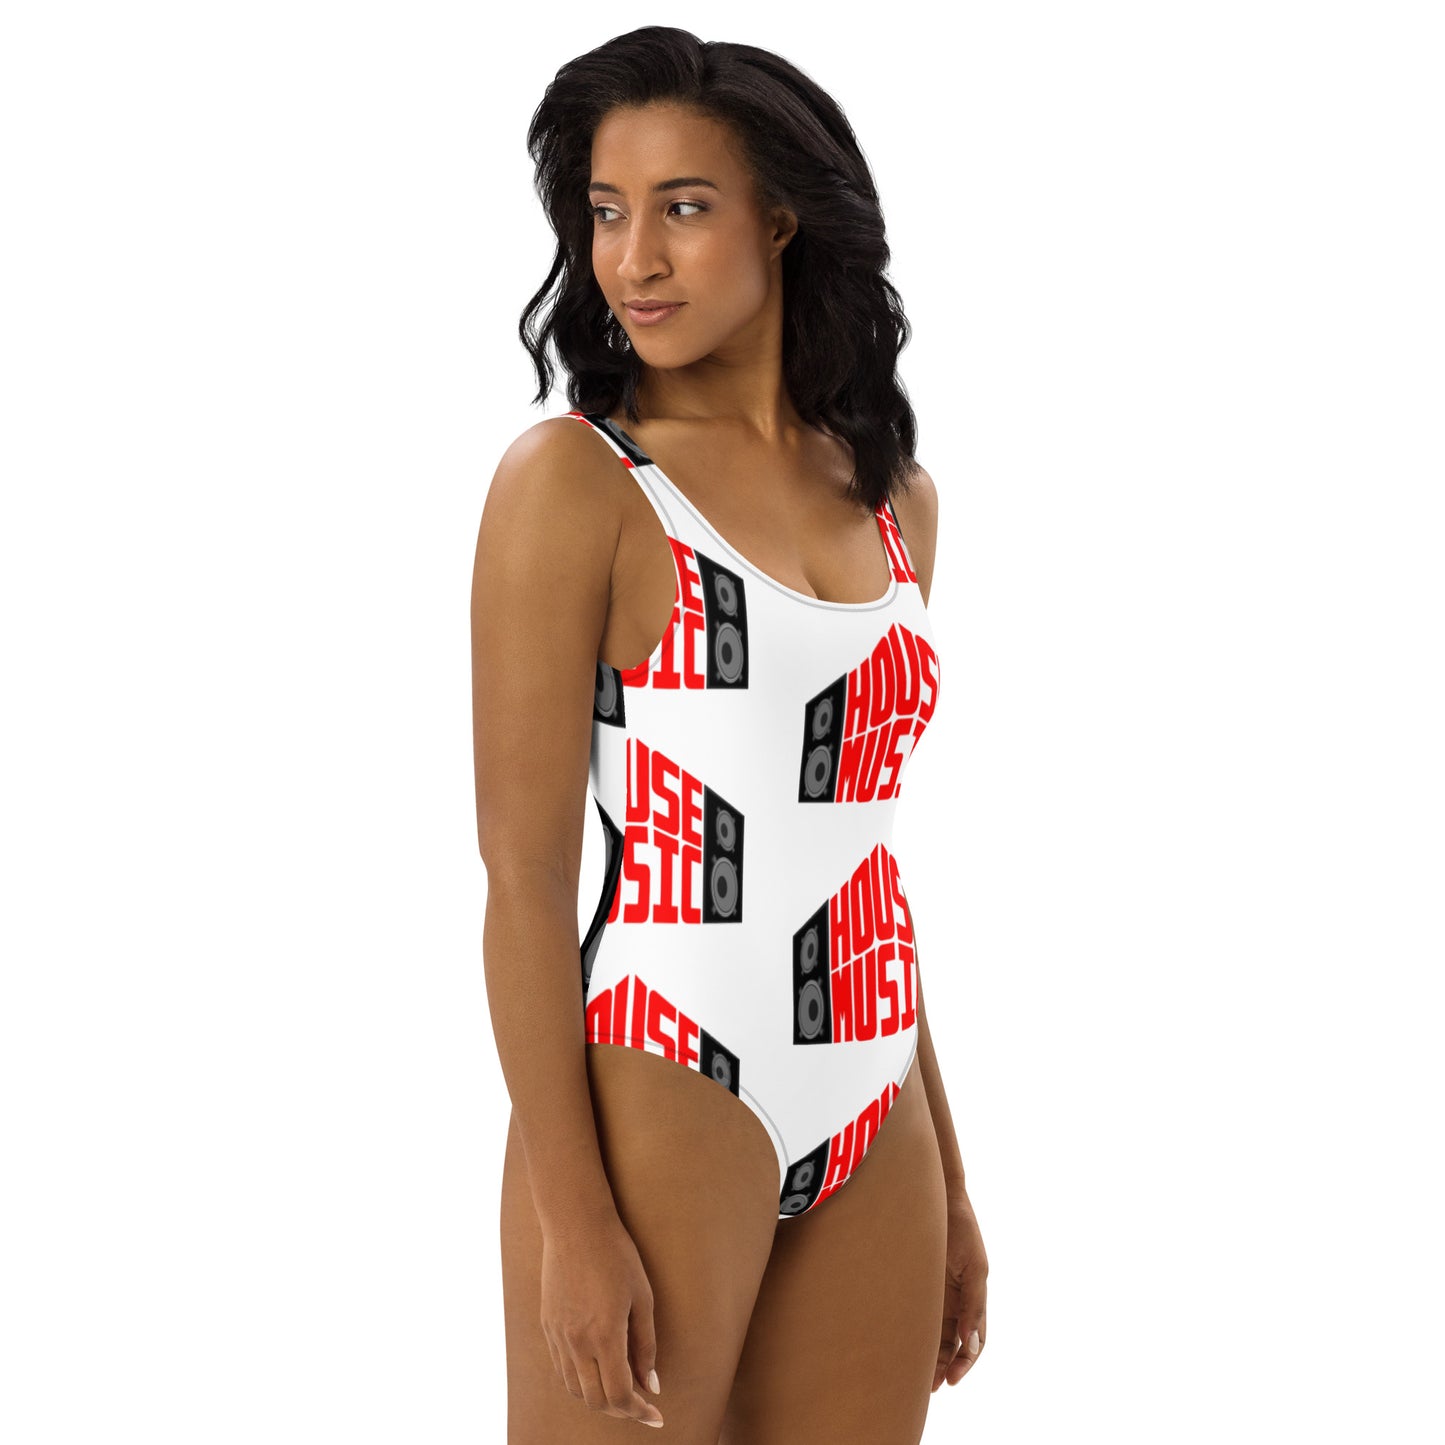 House Music One-Piece Swimsuit sizes XS-3XL